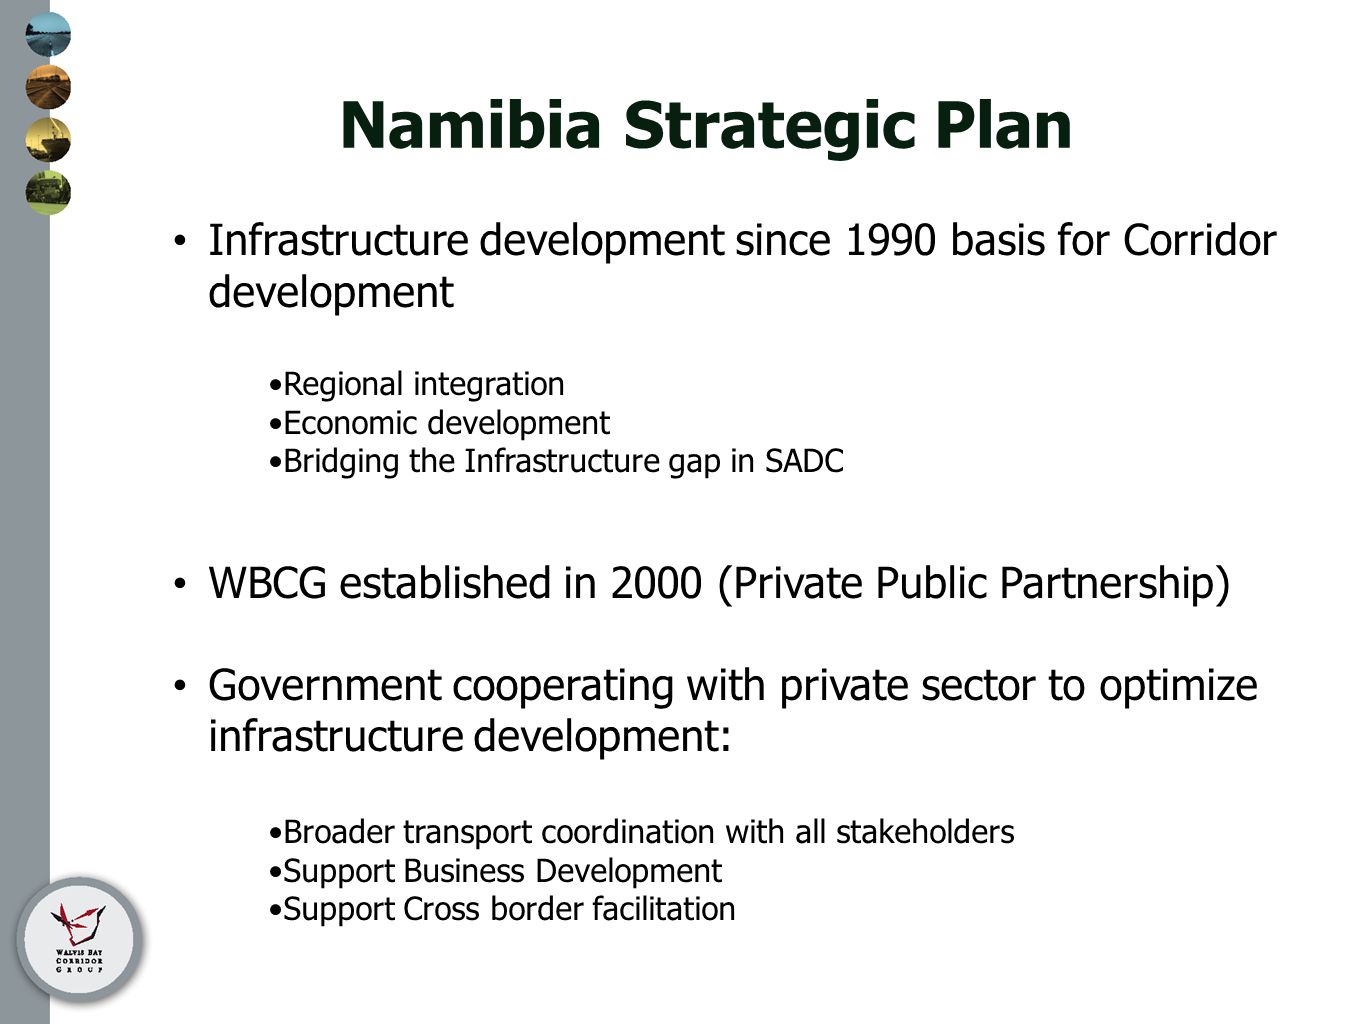 Namibia Strategic Plan Infrastructure development since 1990 basis for Corridor development Regional integration Economic development Bridging the Infrastructure gap in SADC WBCG established in 2000 (Private Public Partnership) Government cooperating with private sector to optimize infrastructure development: Broader transport coordination with all stakeholders Support Business Development Support Cross border facilitation